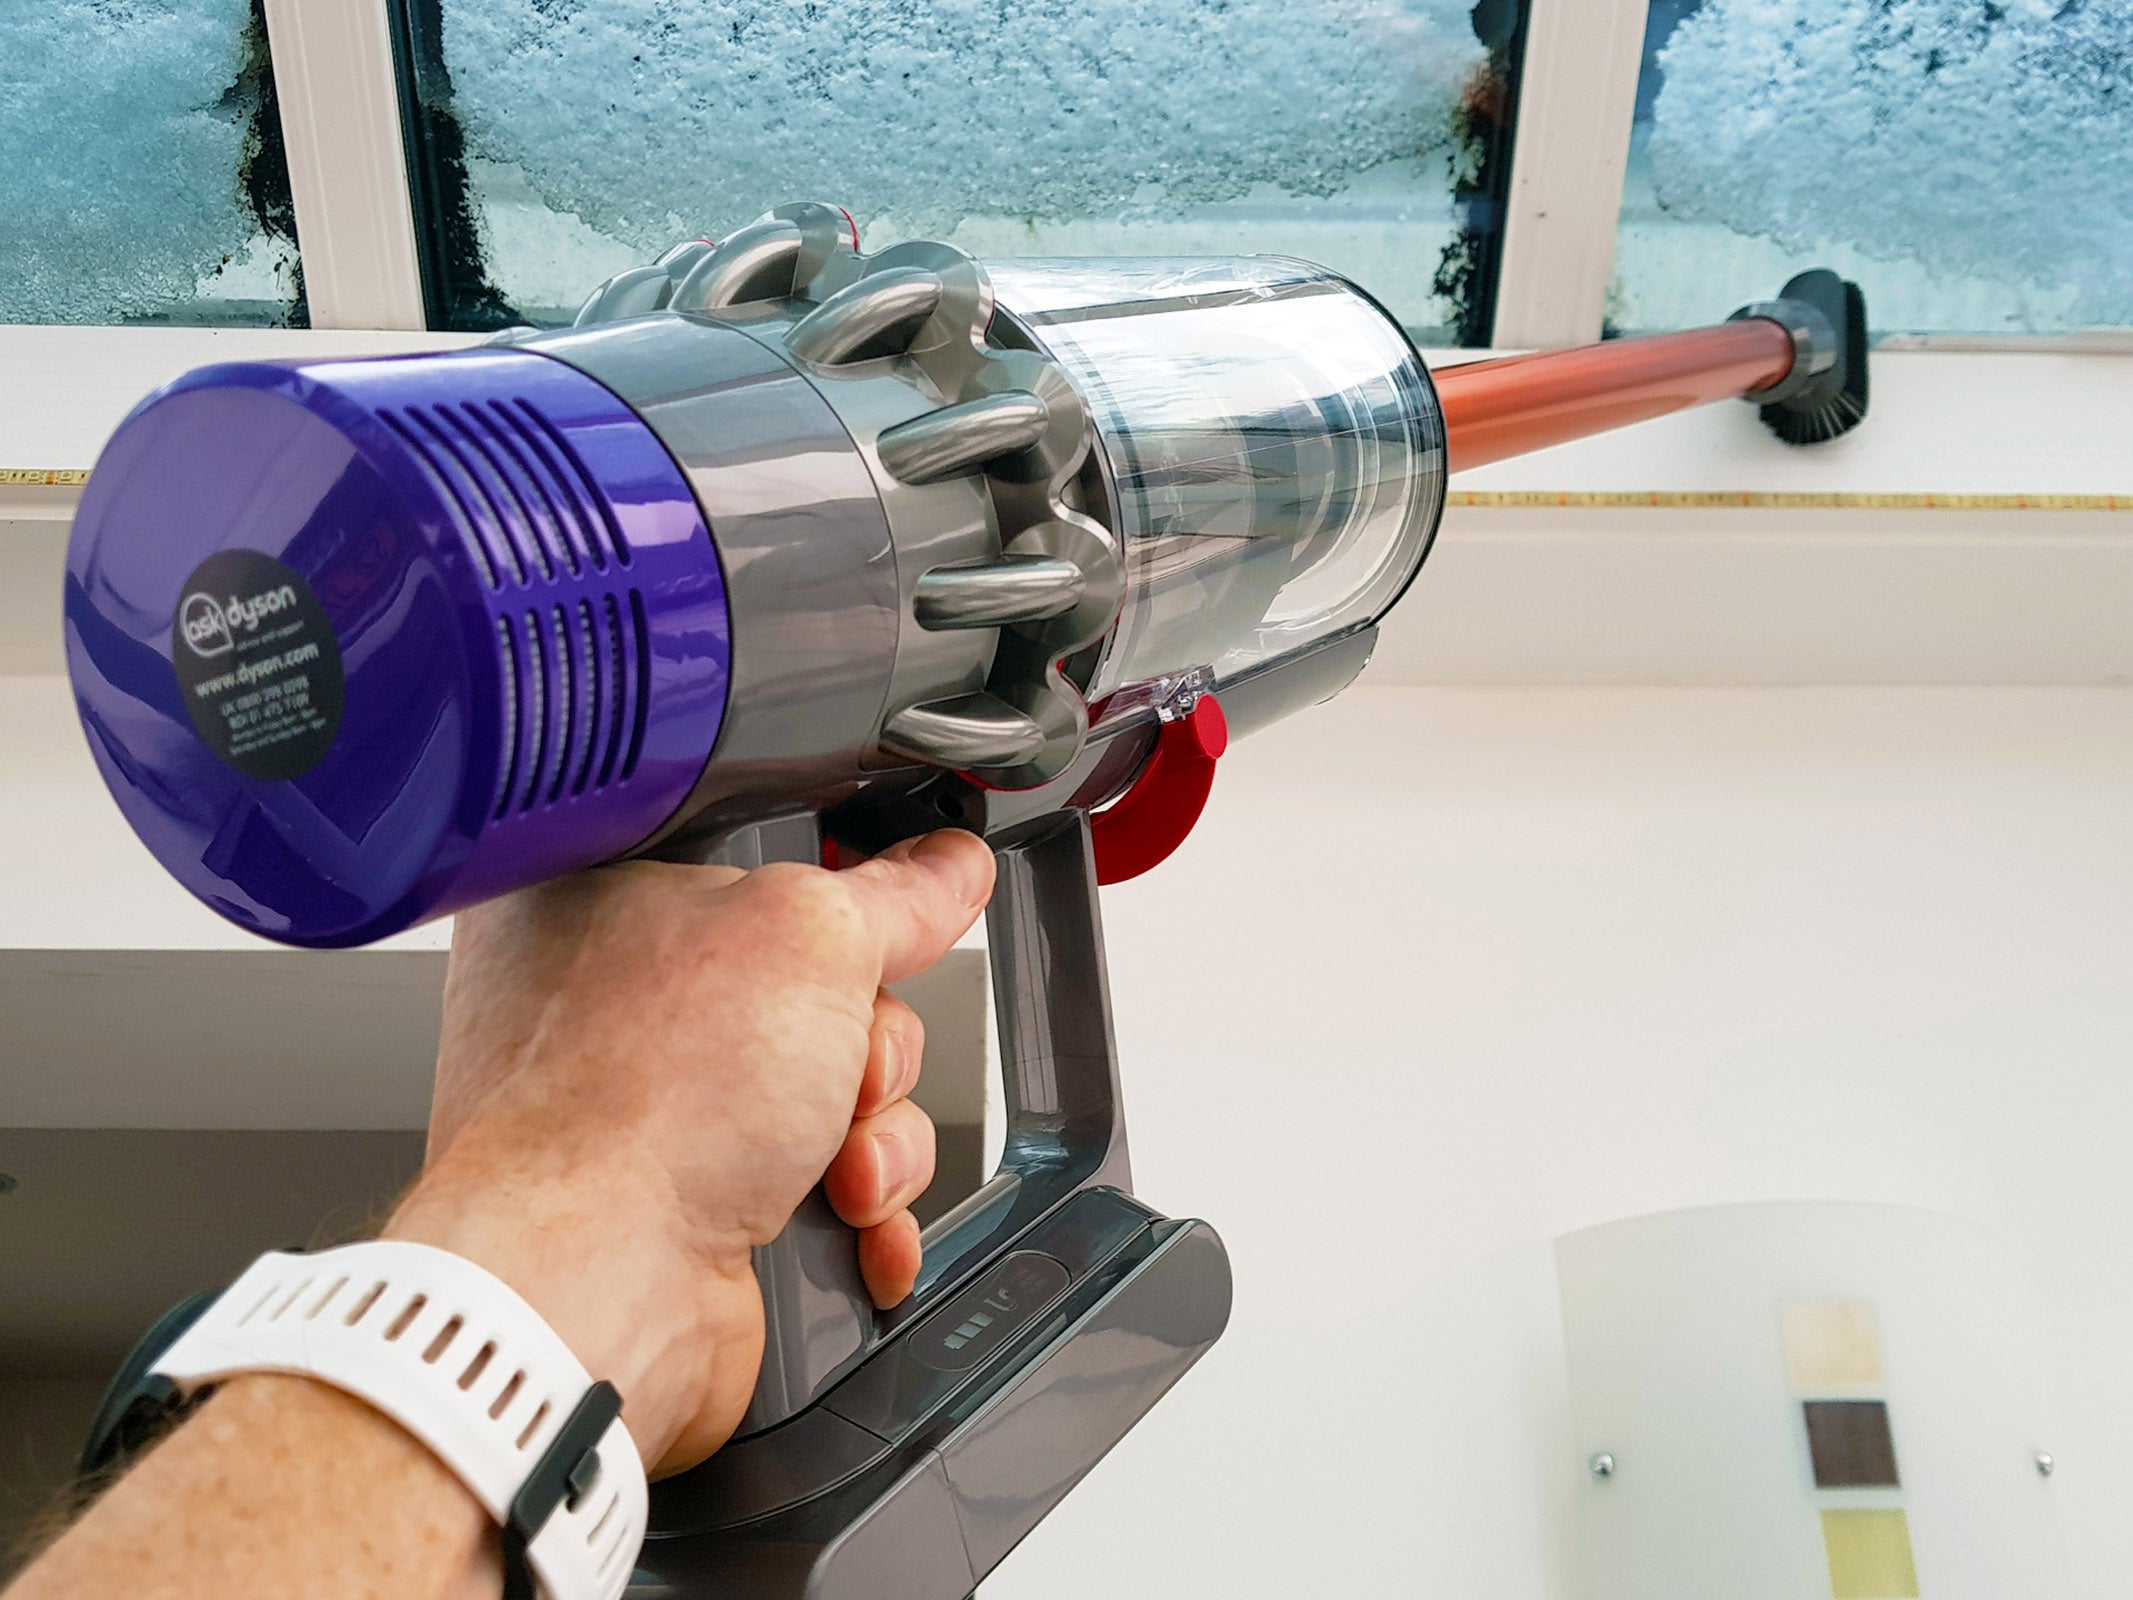 Dyson Cyclone V10 Absolute Review